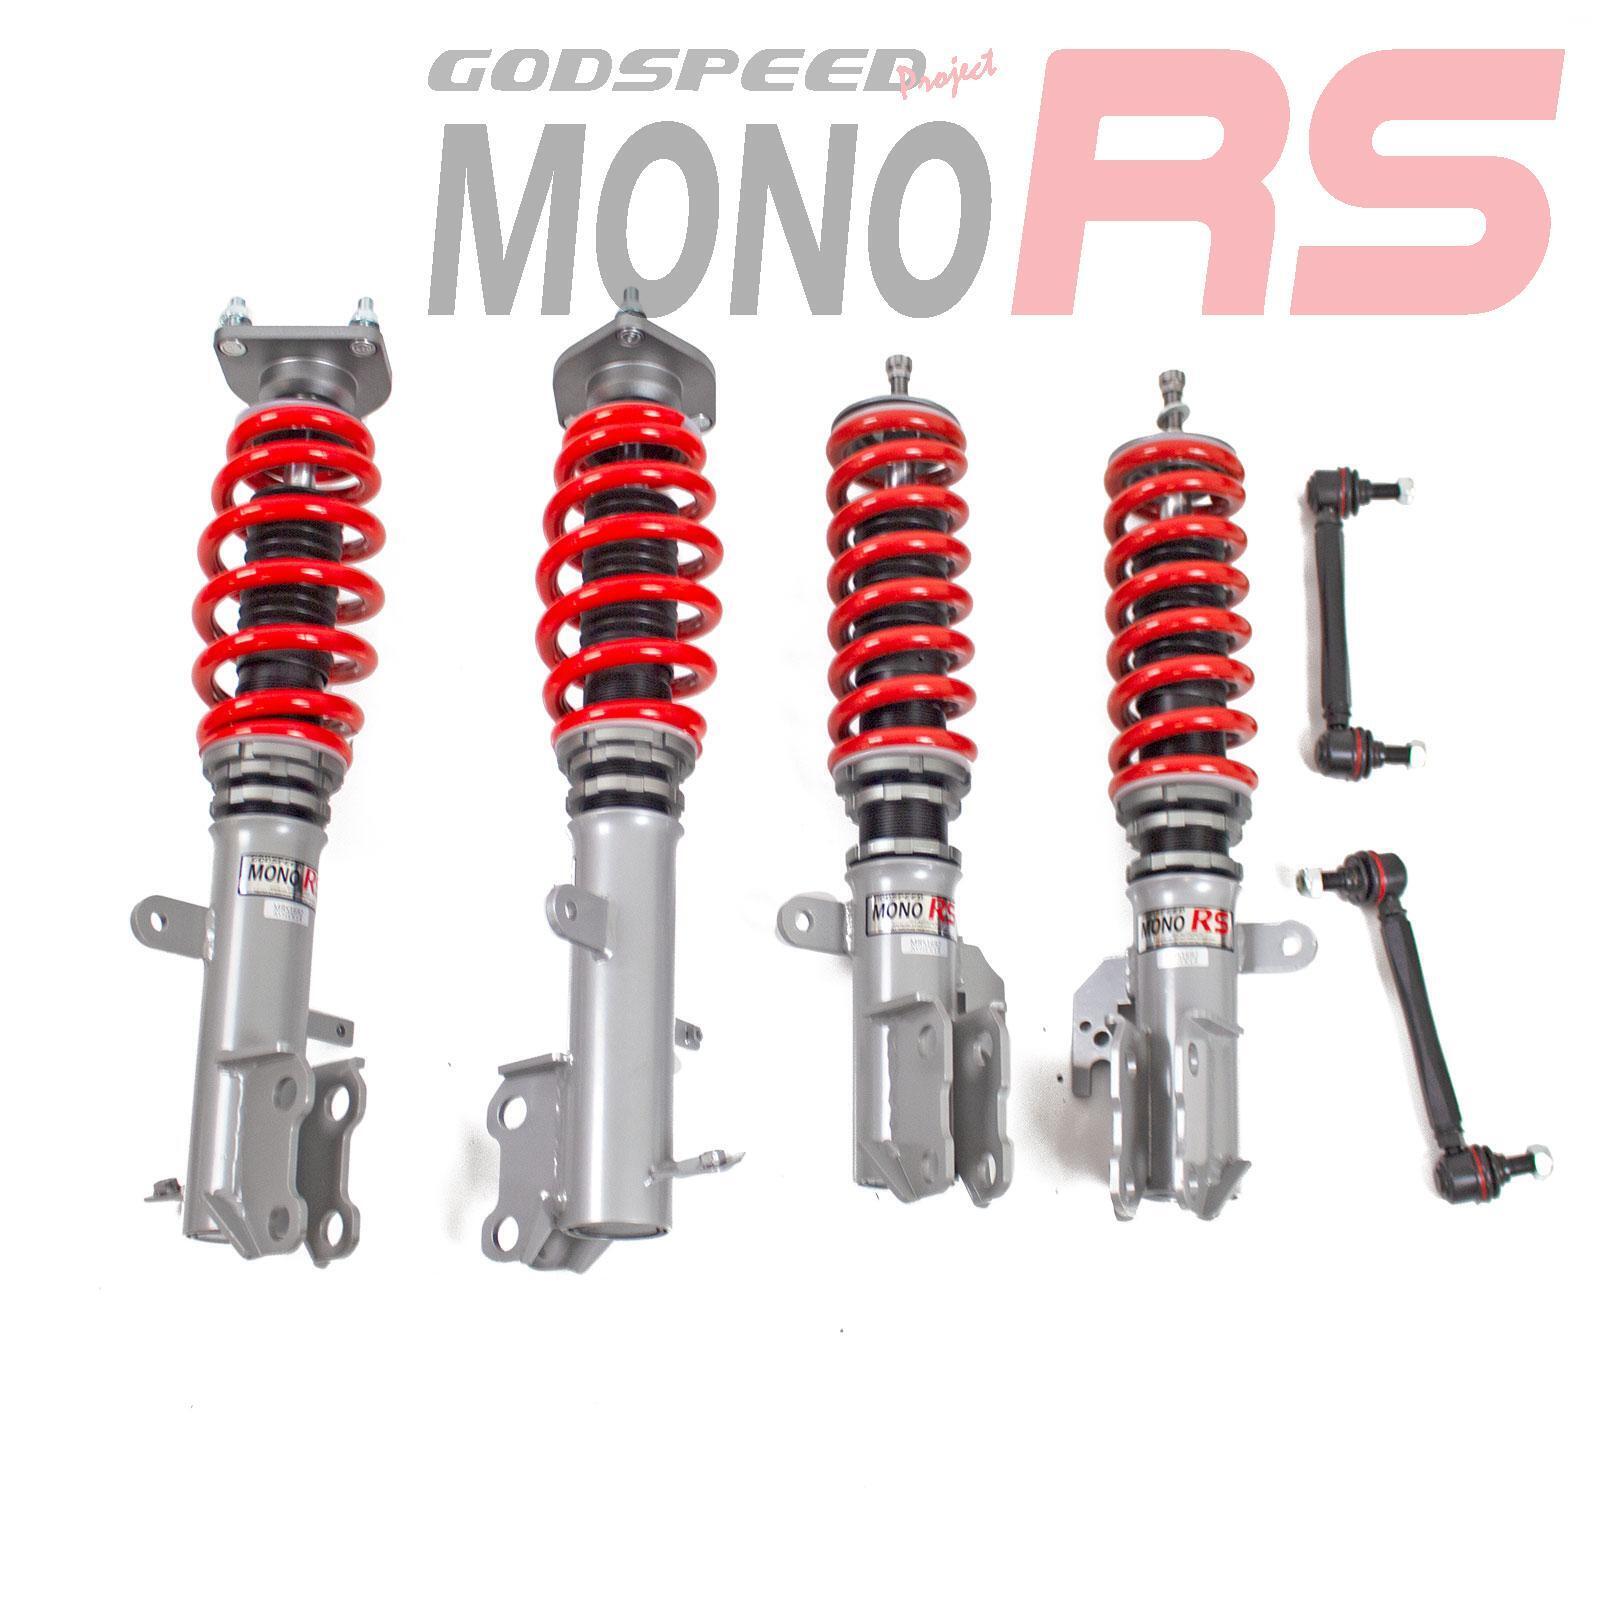 MonoRS Coilovers Lowering Kit for Toyota Venza AWD 09-15 Fully Adjustable